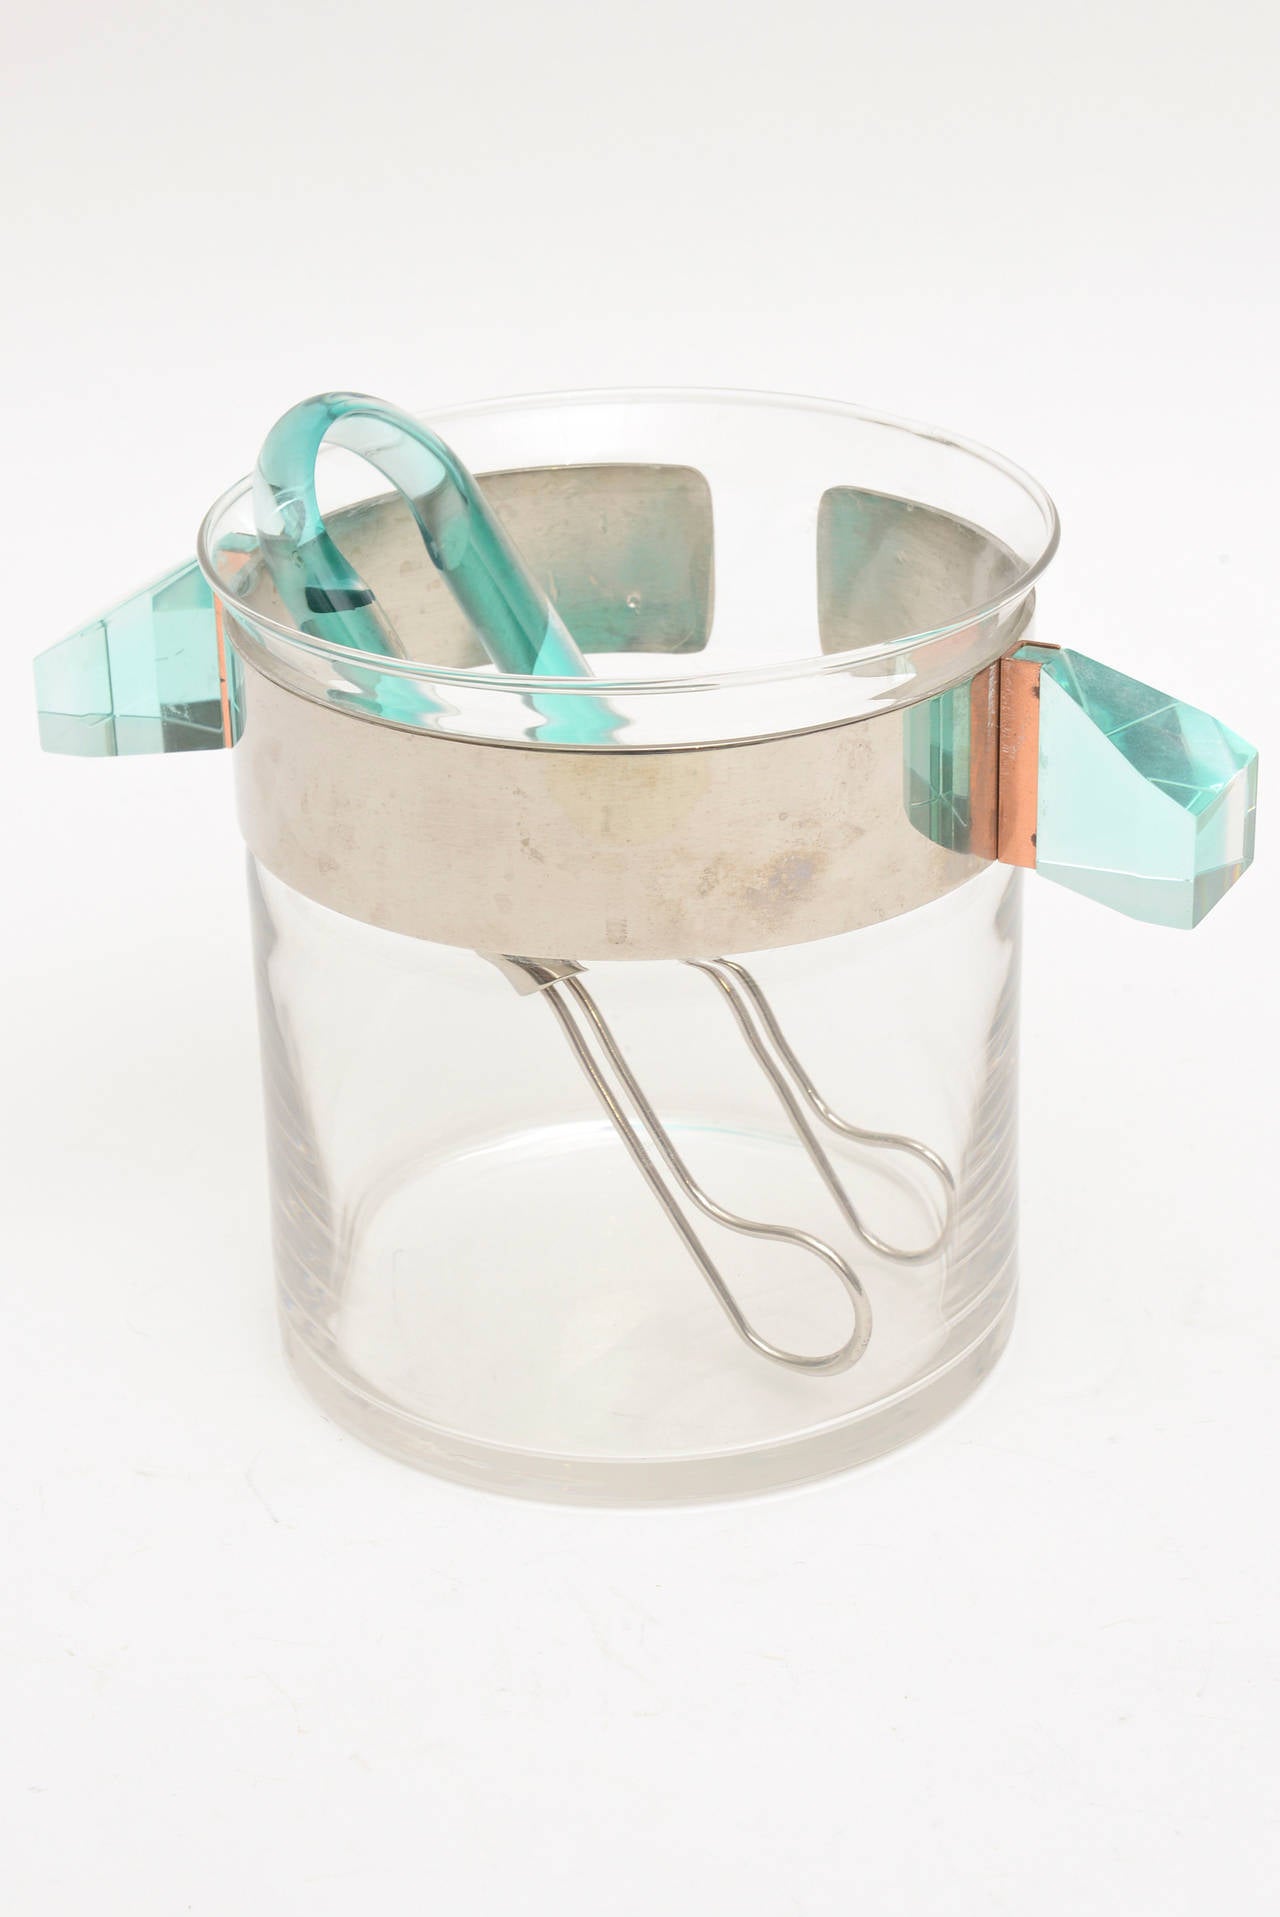 This fantastic Italian unusual and rare ice bucket is signed by Rede Guzzini.
Handmade in Italy.
The round cylinder is glass with brilliant colored Lucite handles in turquoise sea green. It is connected with copper on the handles and a chrome band